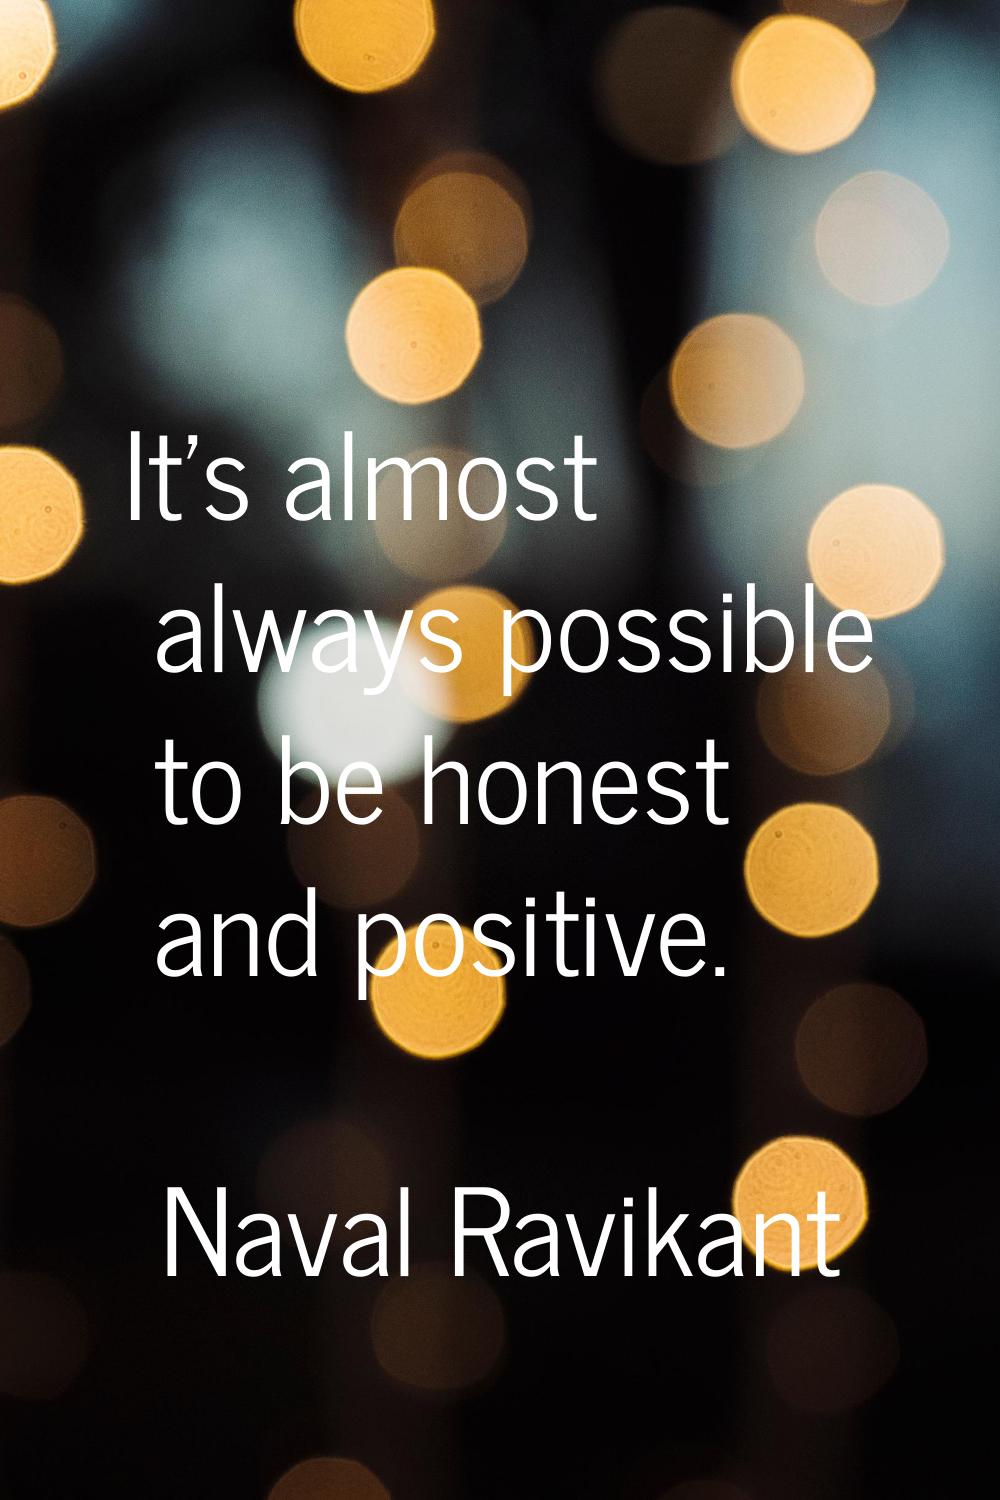 It's almost always possible to be honest and positive.